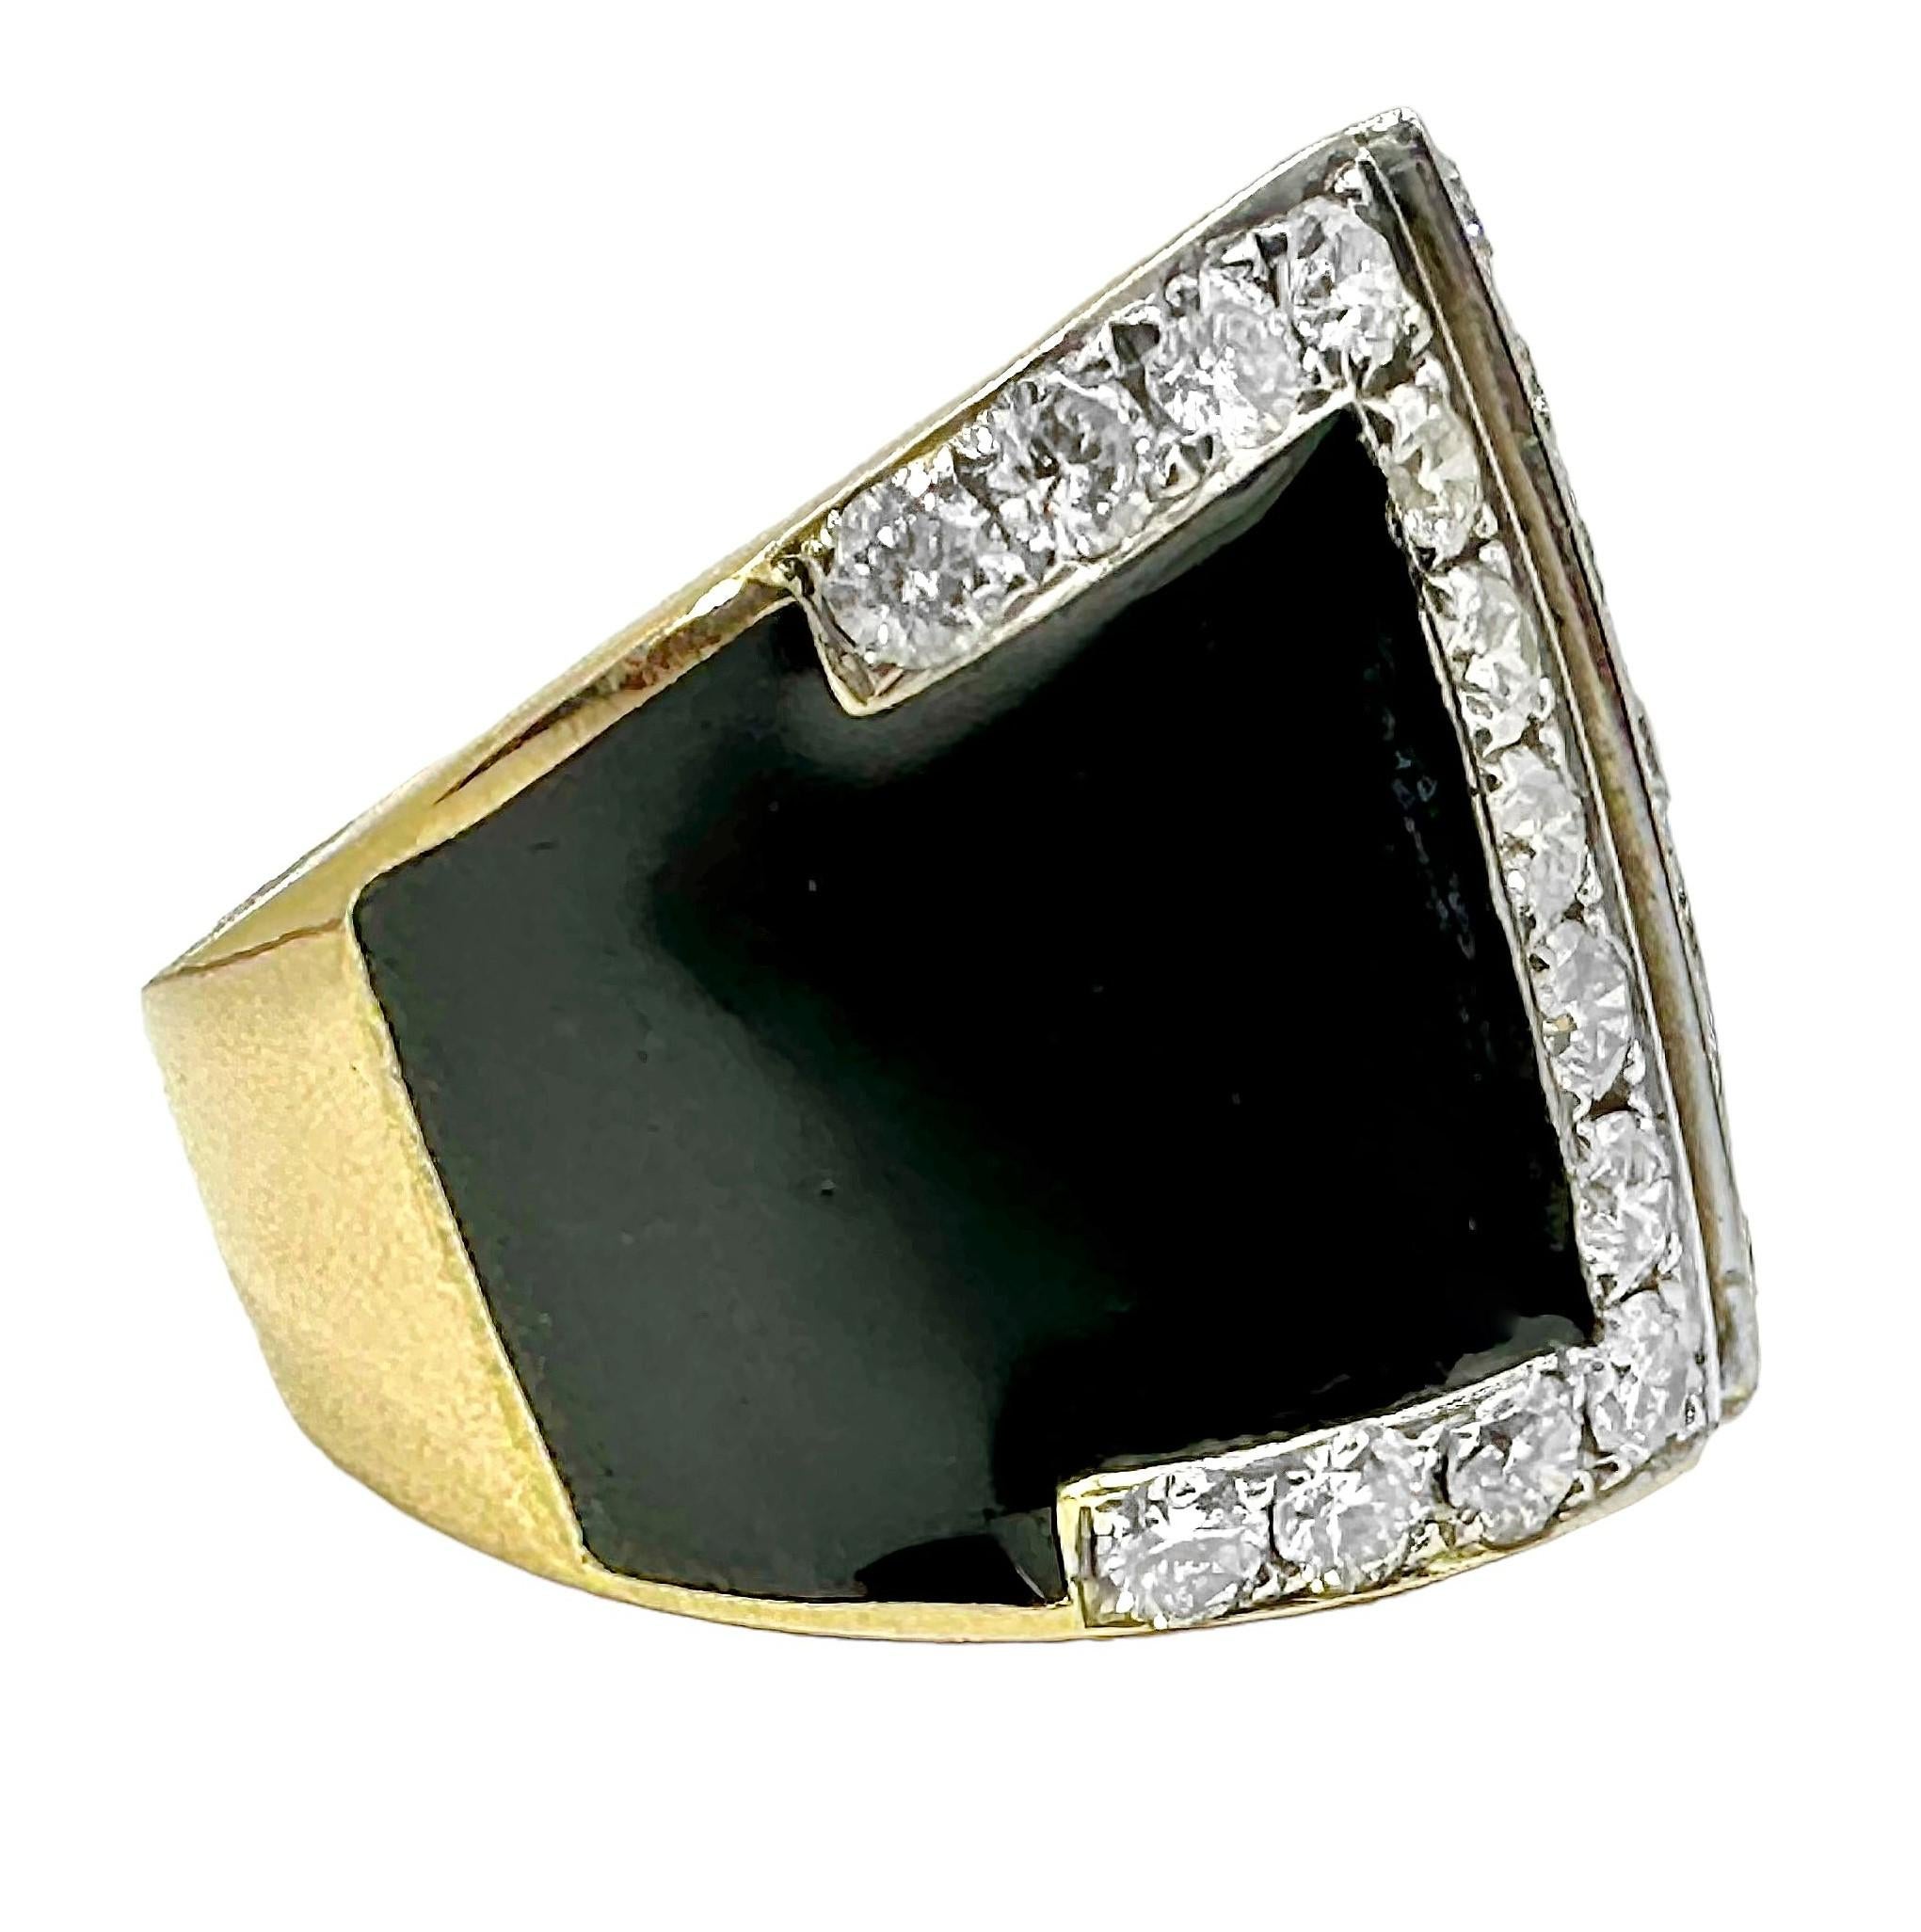 This very stylish and well crafted 18K yellow gold cocktail ring can only be described as 